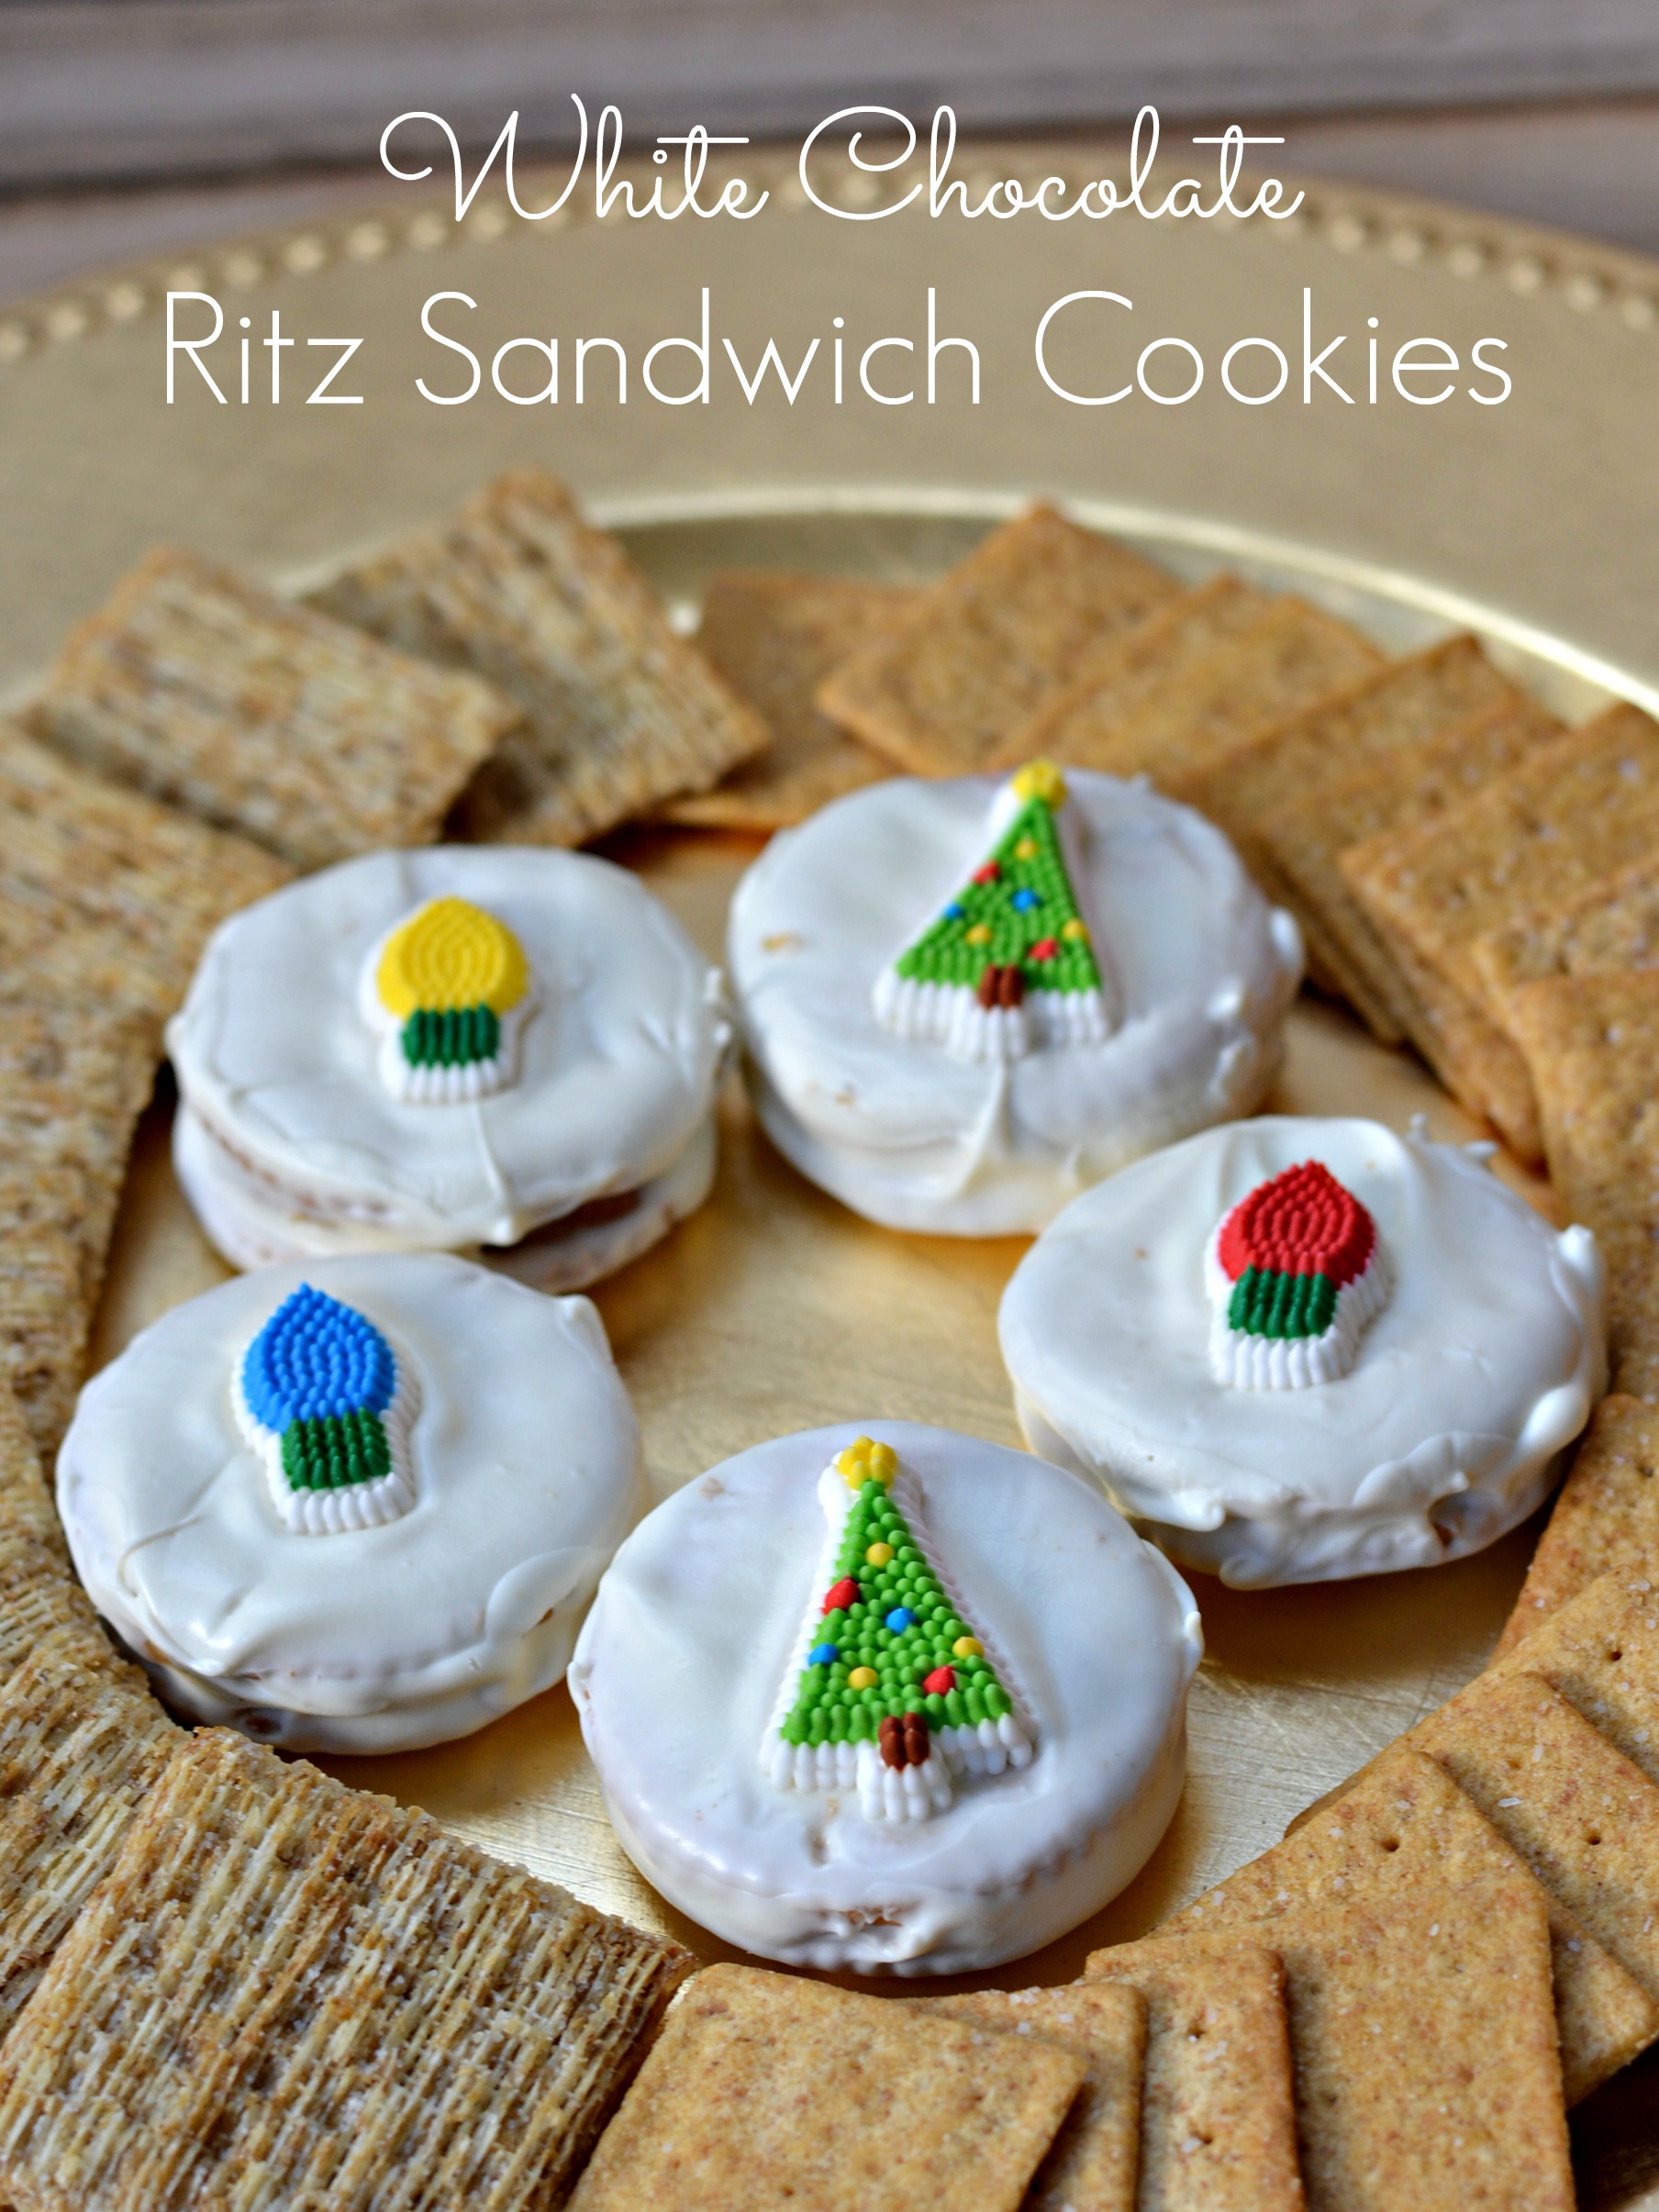 Ritz sandwich cookies are fun and easy to make! Spread peanut butter between two Ritz crackers and then dip in white chocolate to make delicious sandwich cookies. 